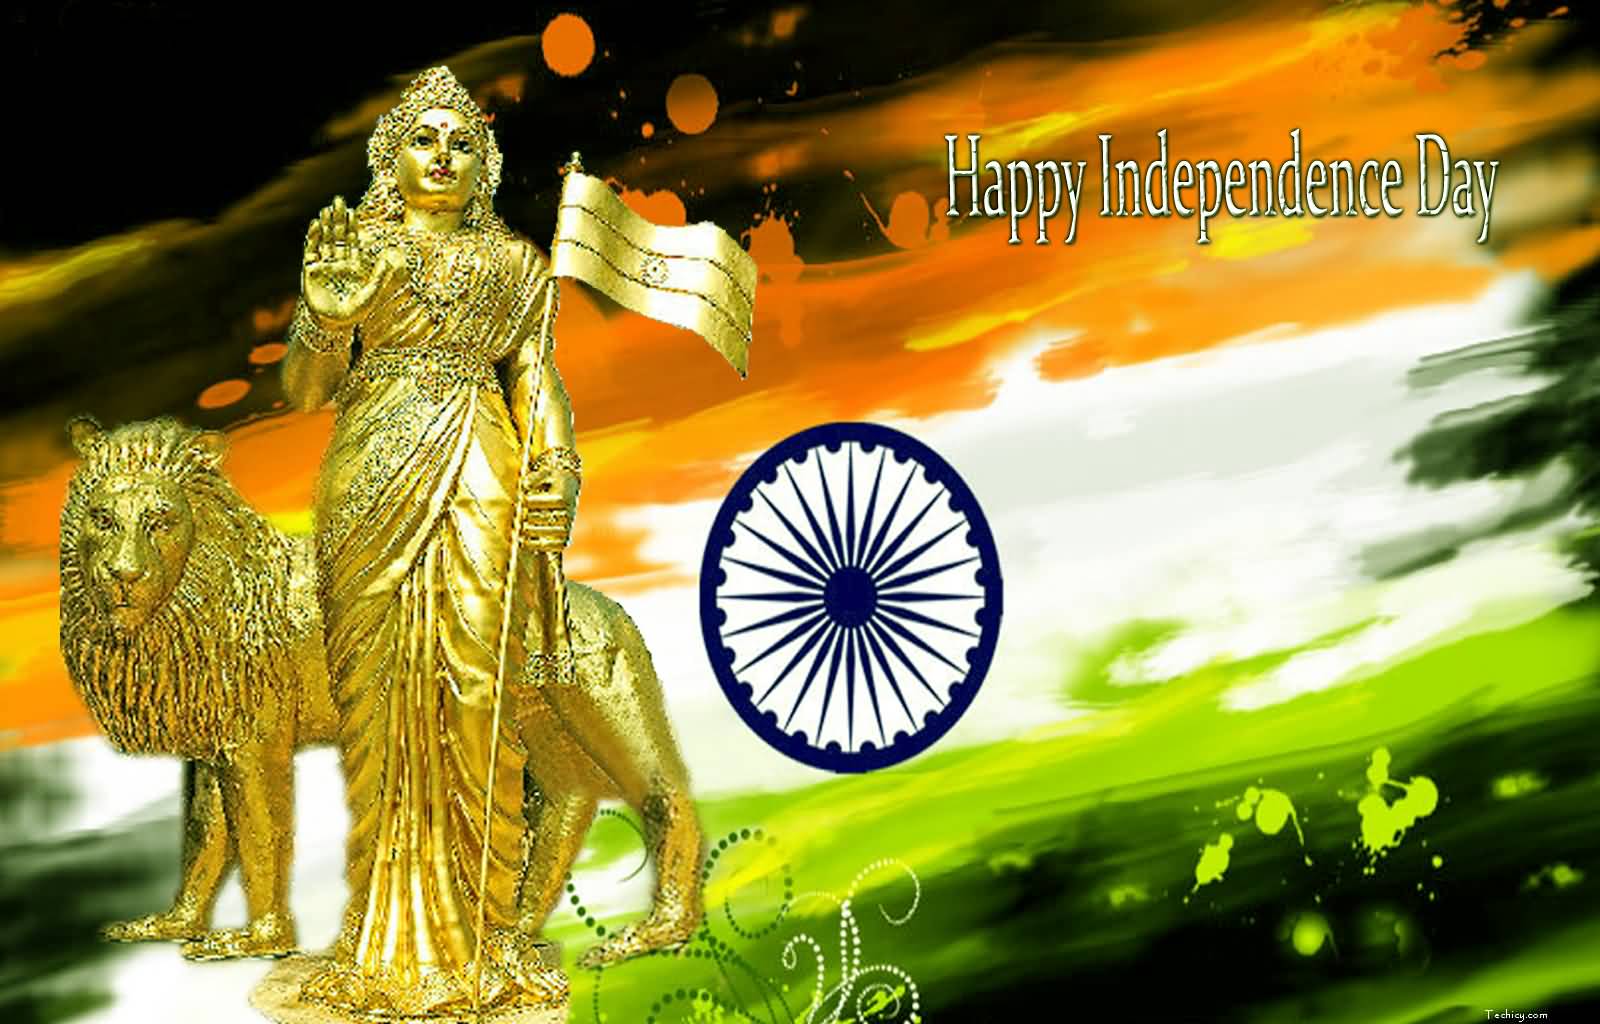 Happy Independence Day Indian Goddess Picture